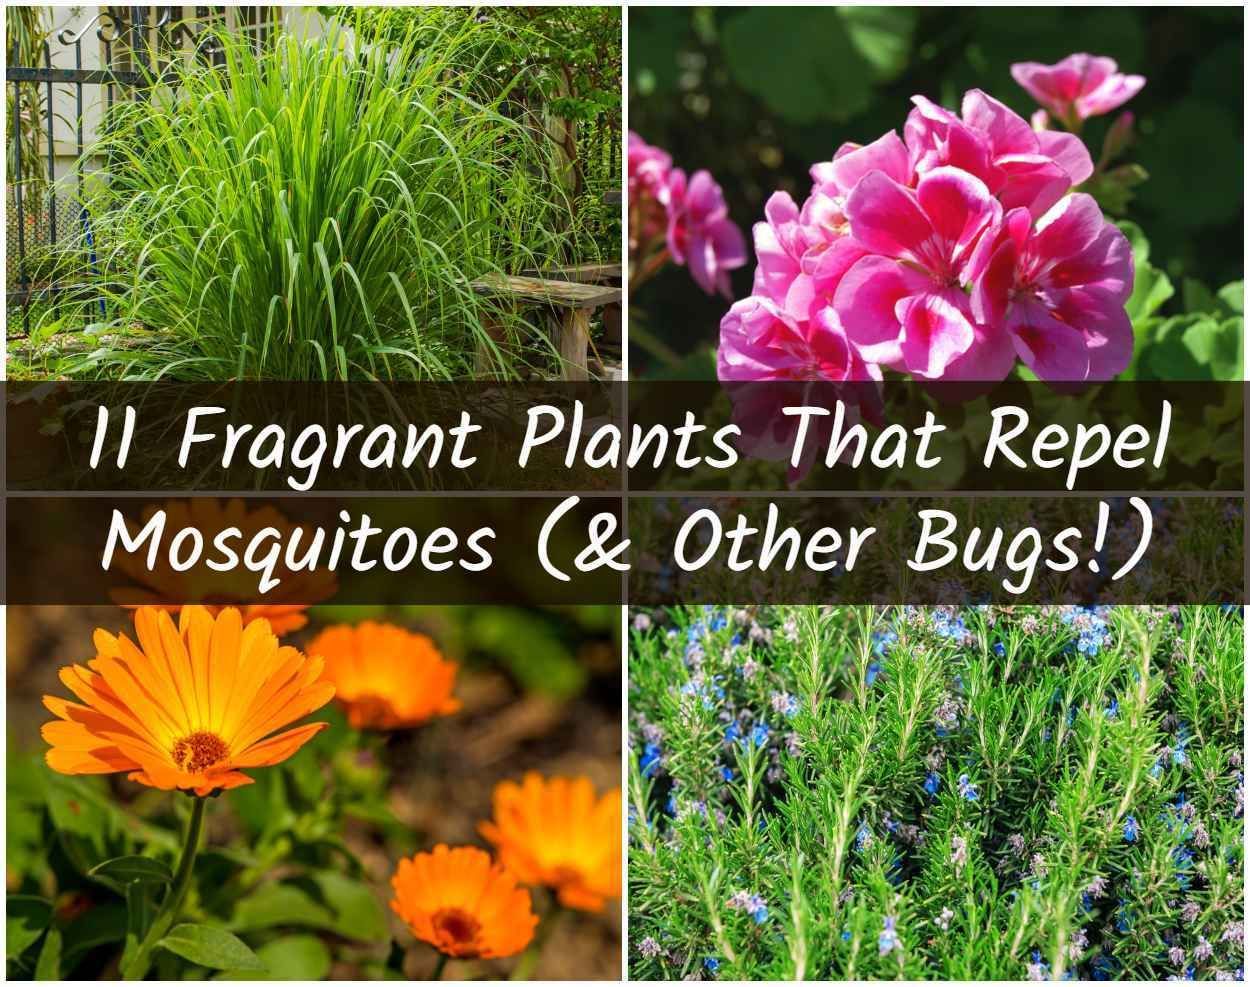 11 Fragrant Plants That Repel Mosquitoes -   17 plants That Repel Mosquitos people ideas